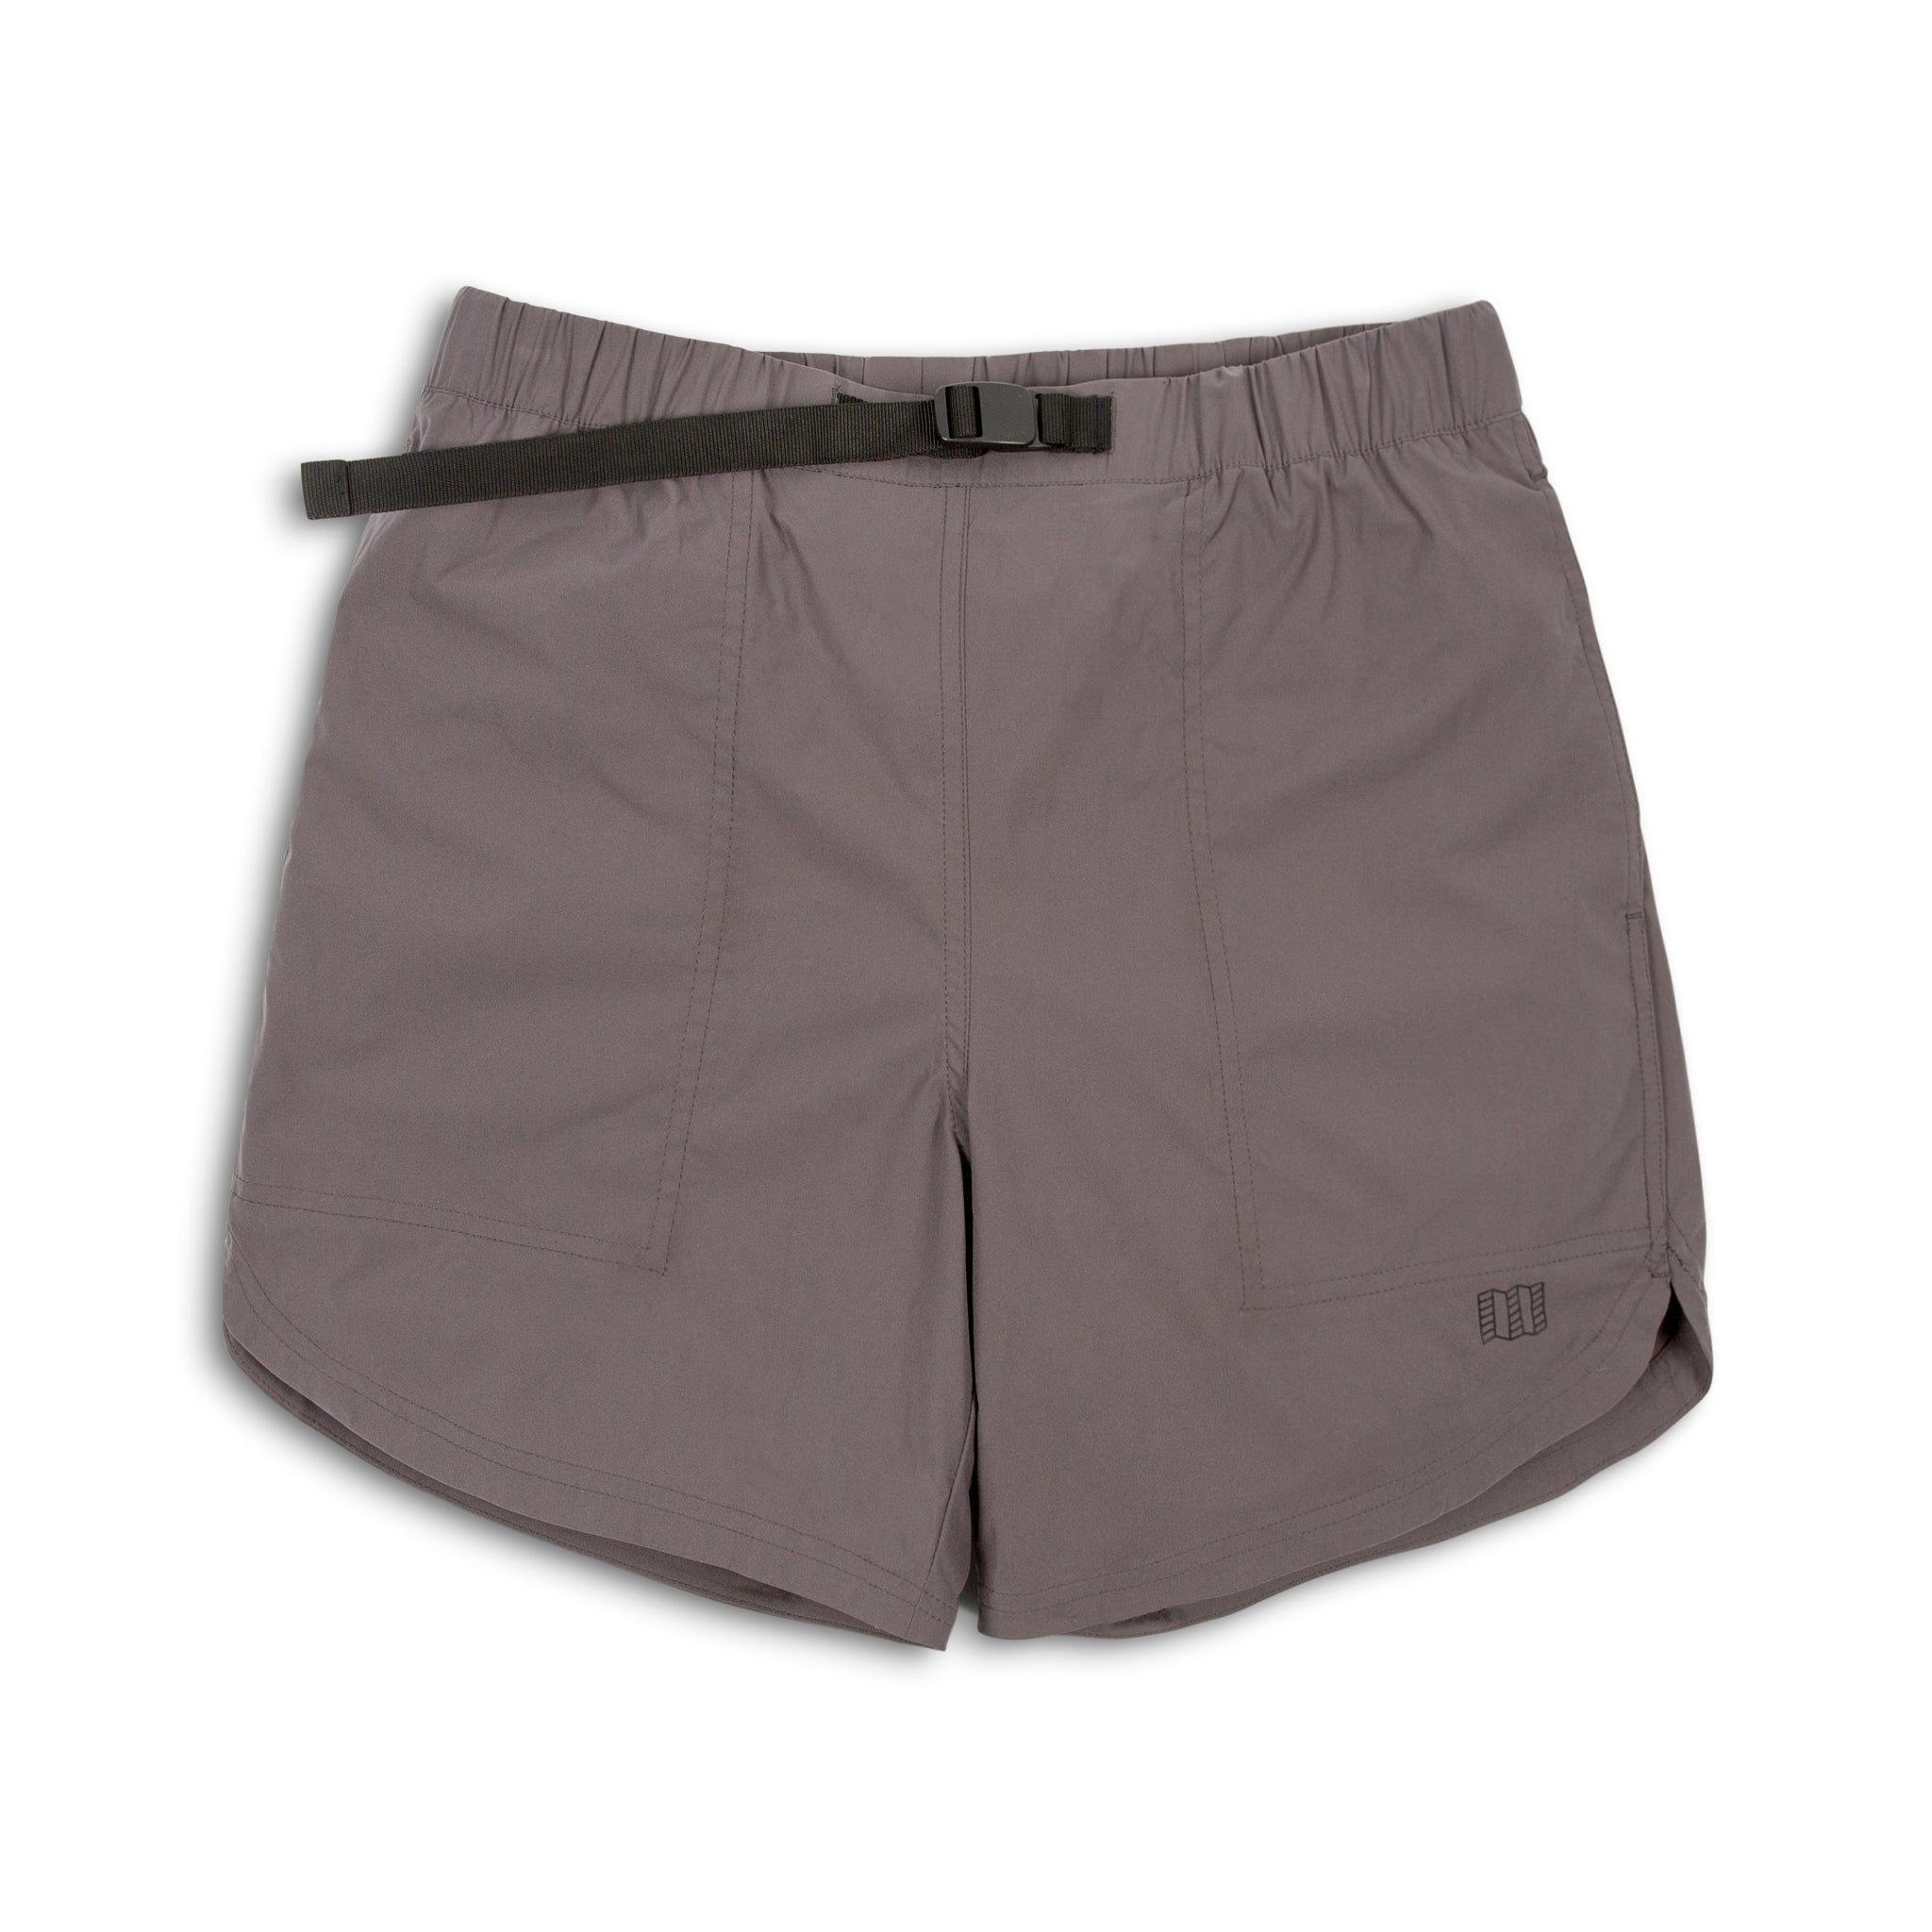 Topo Designs : River Shorts Lightweight : Charcoal